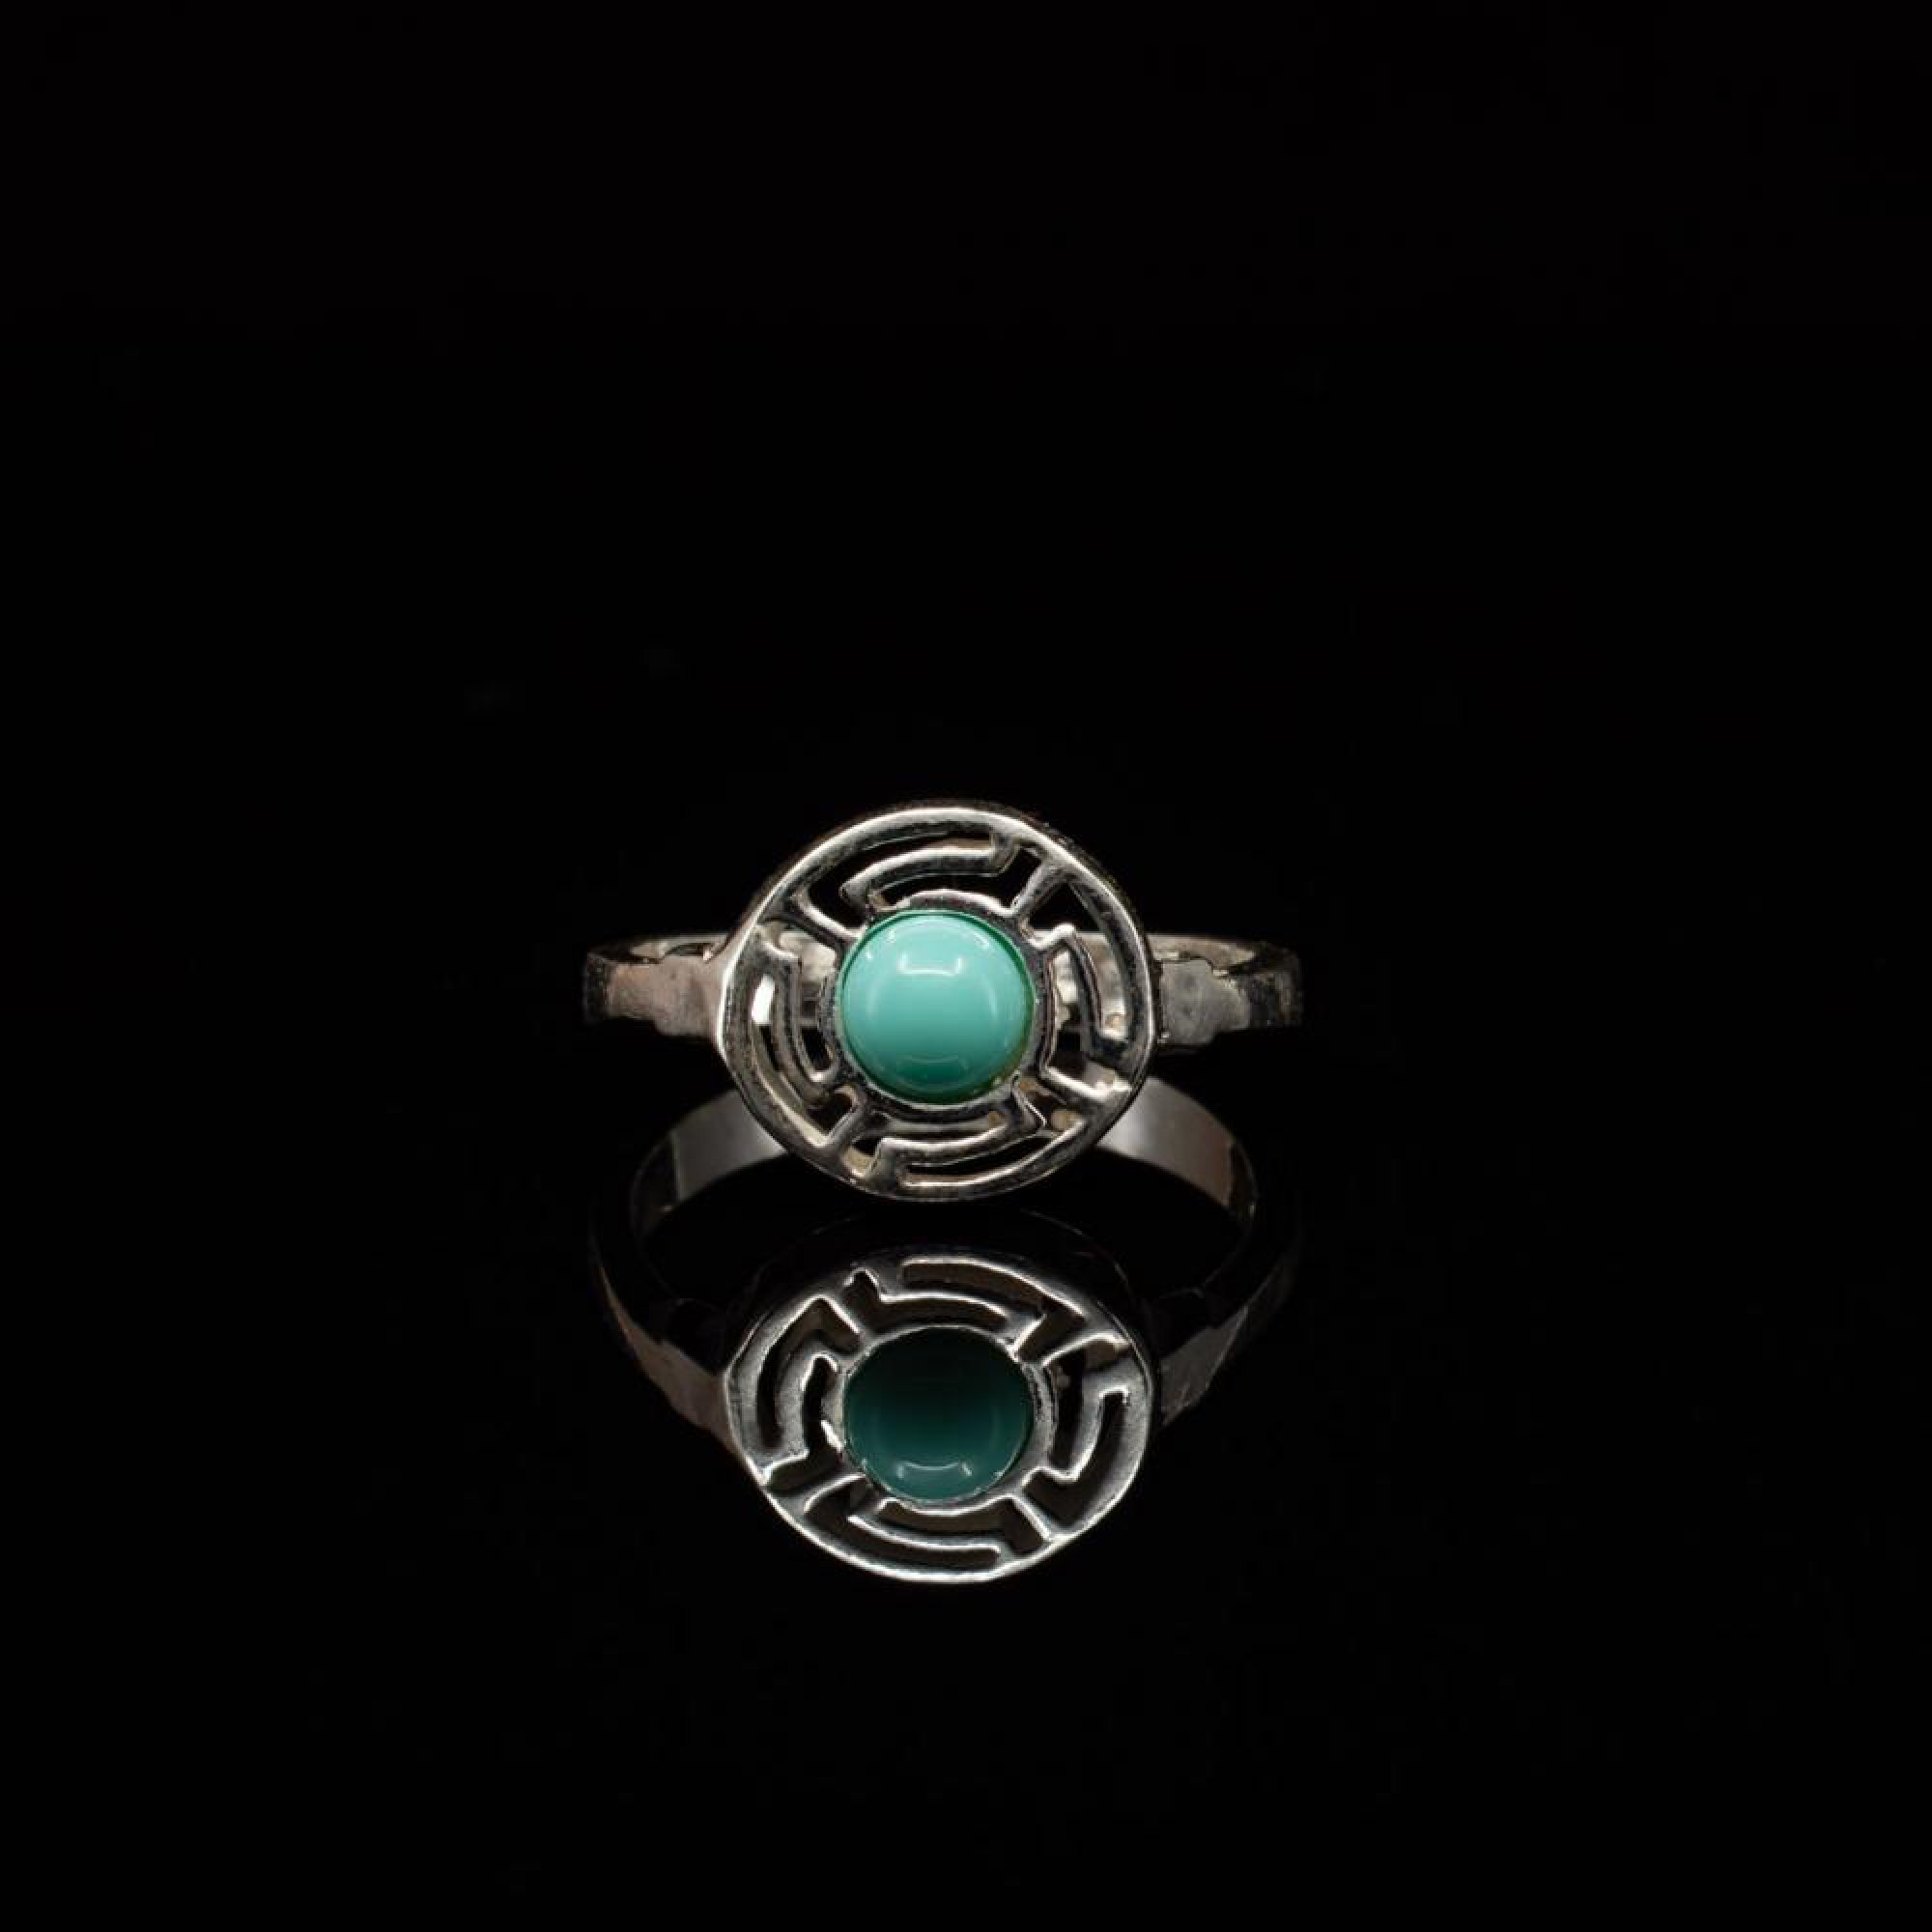 Meander ring with turquoise stone